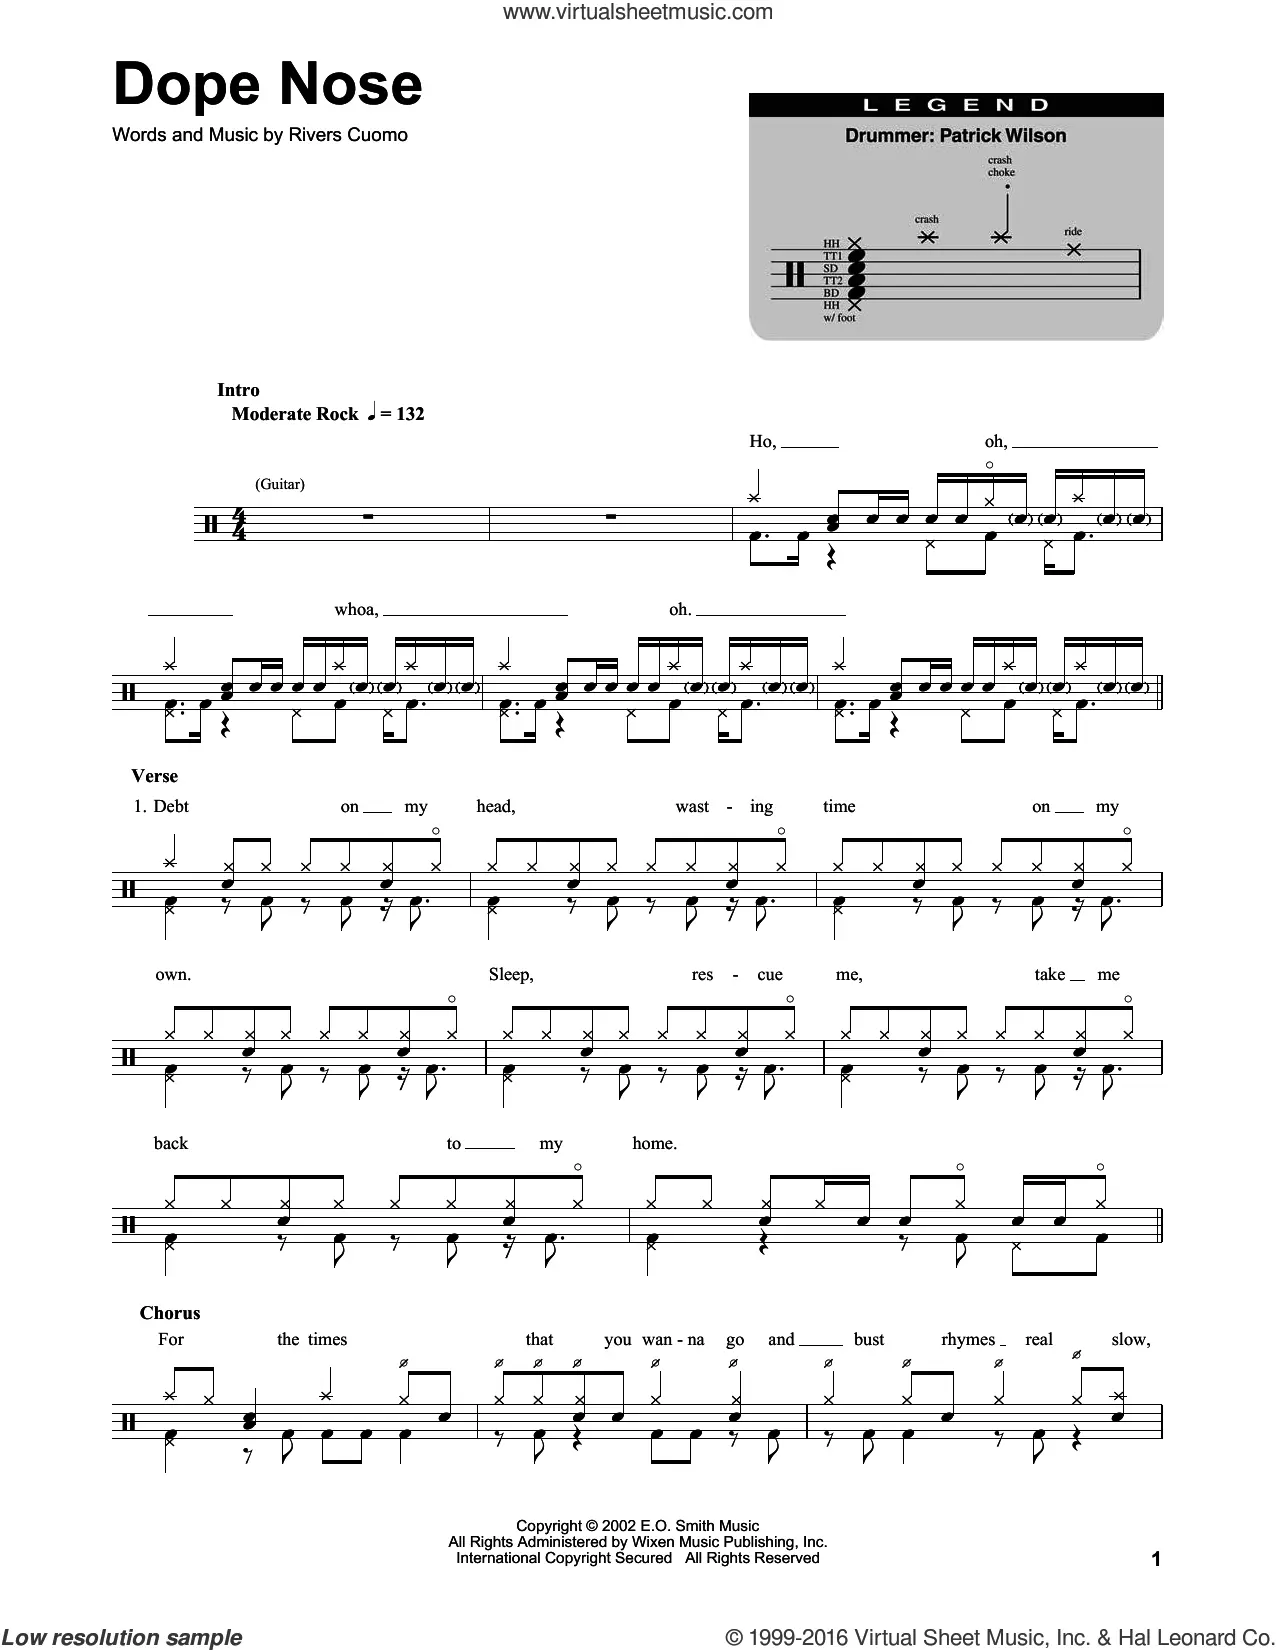 Weezer Sheet Music to download and print